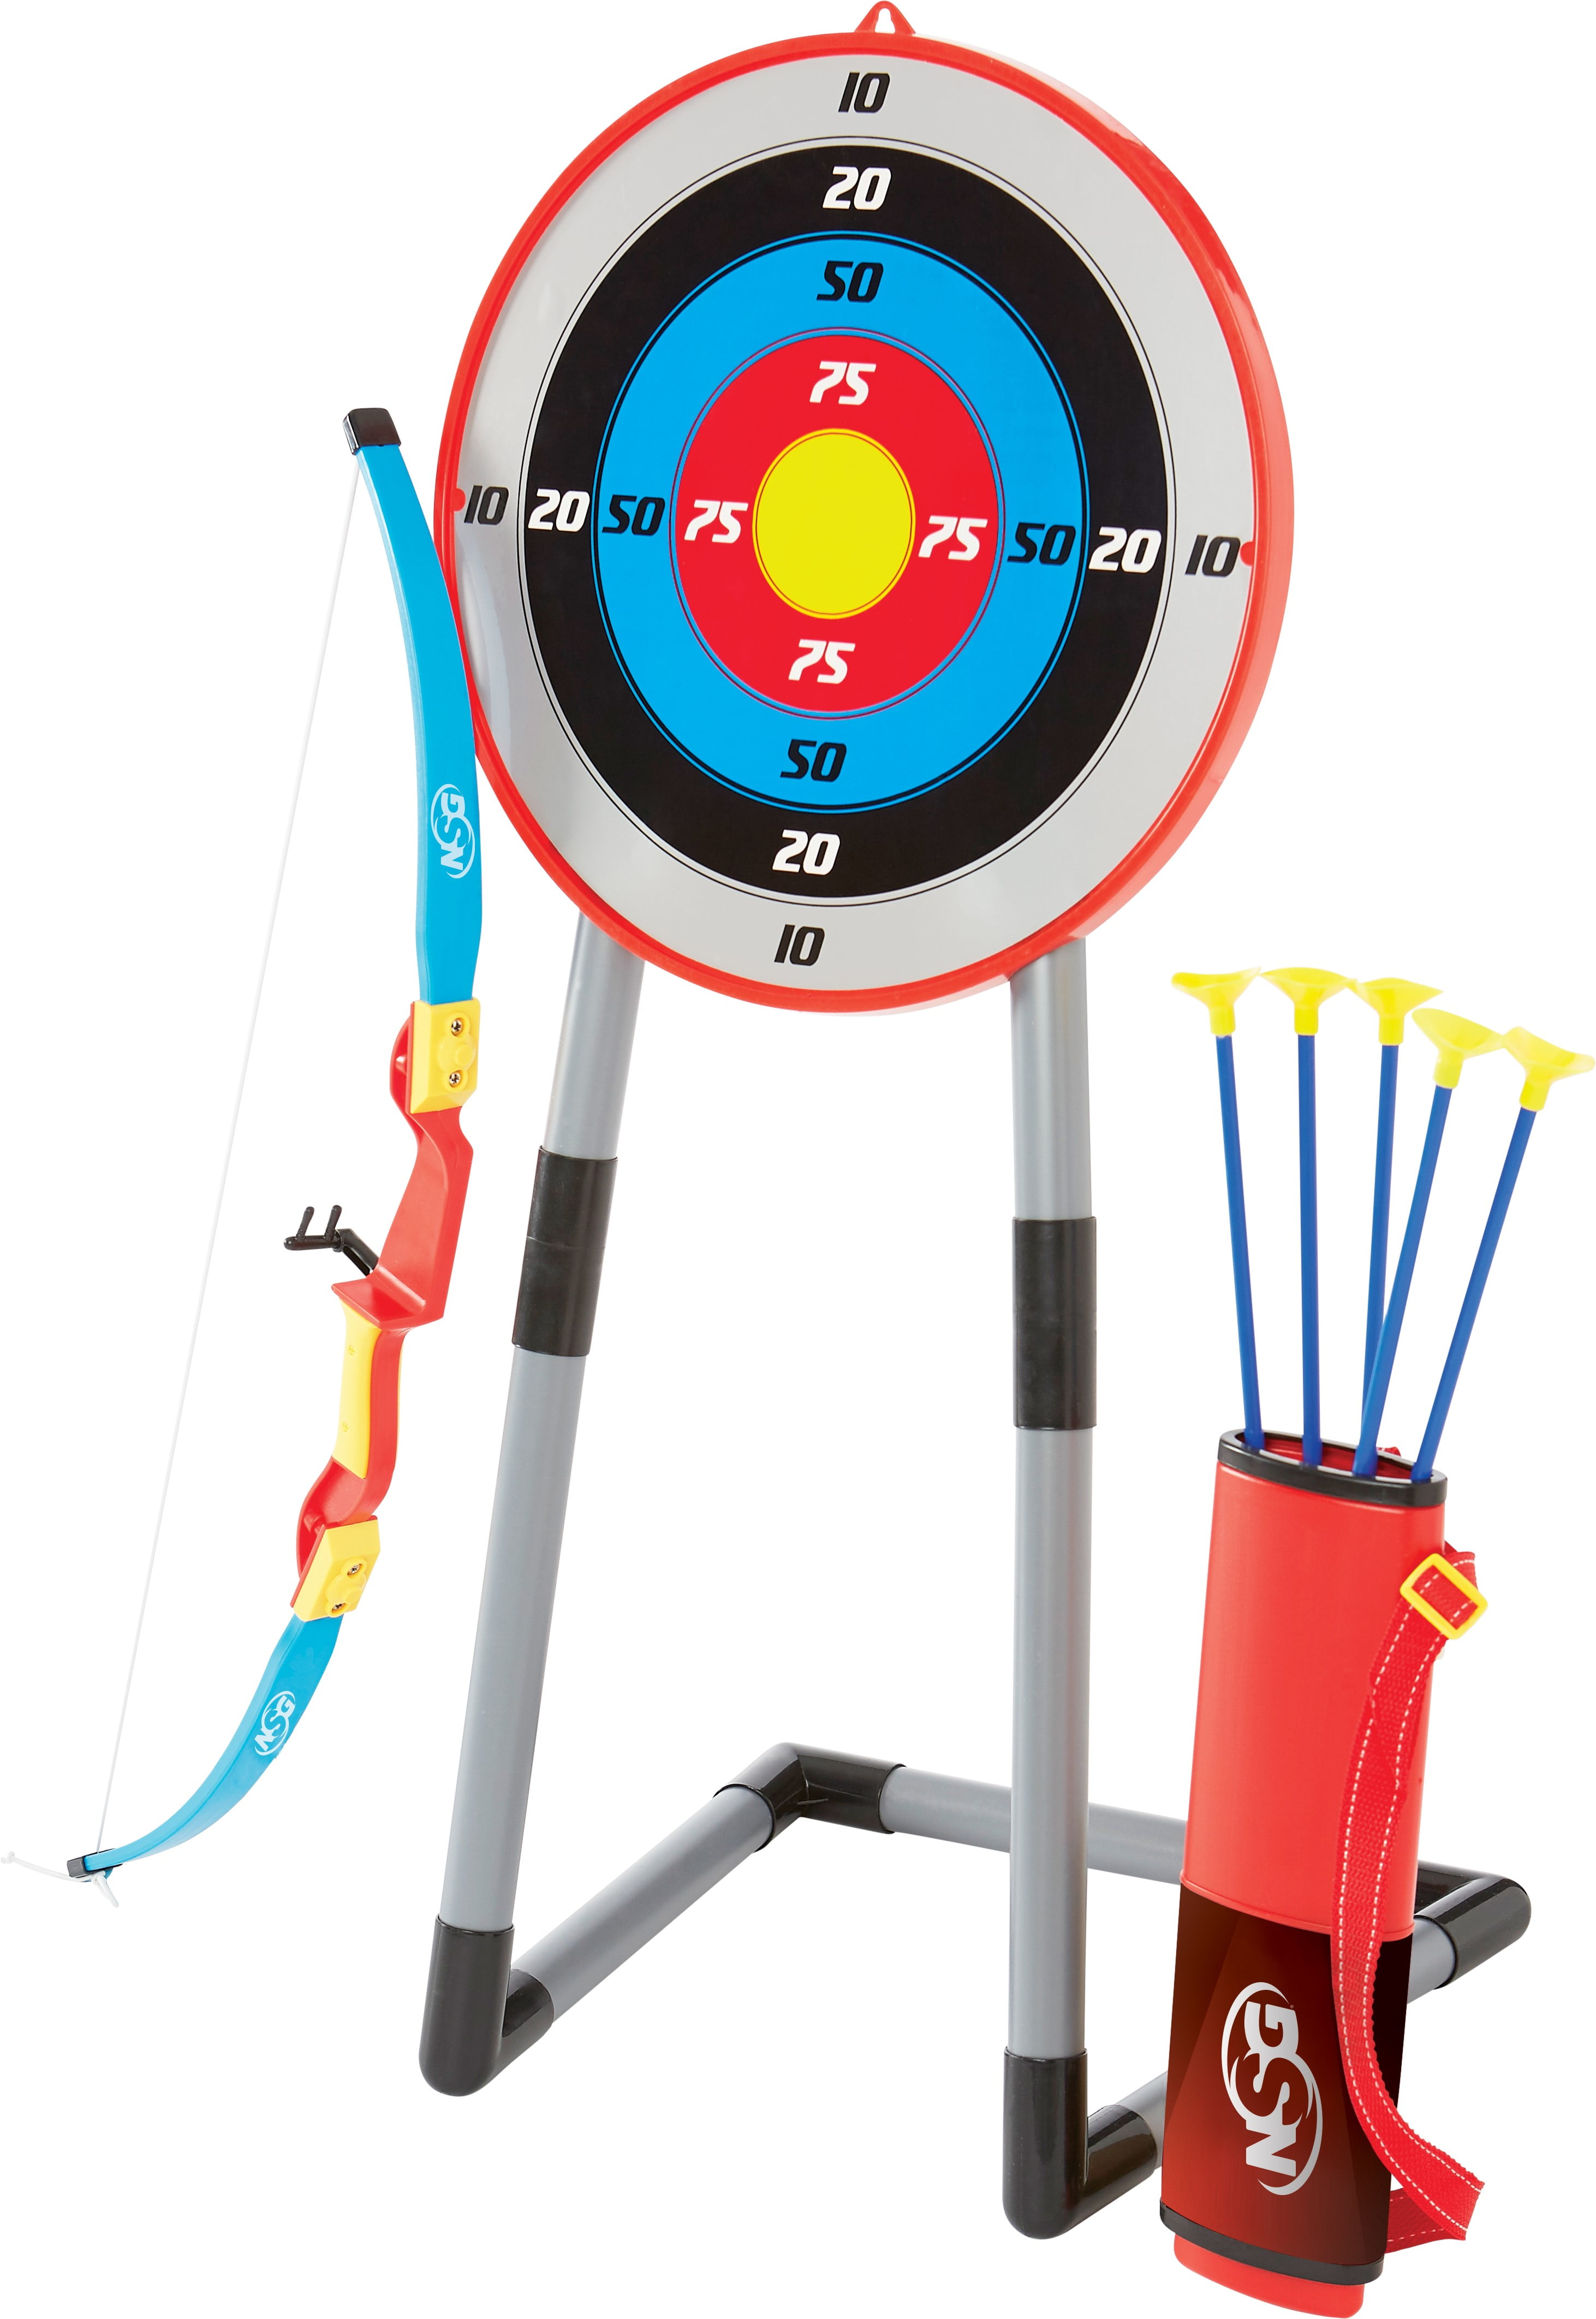 NSG Deluxe Bow & Arrow Archery Set for Kids - Toy Archery Bow with Large  Freestanding Target, Suction Cup Arrows, and Quiver - Toys for Children  Above 6 Years of Age 